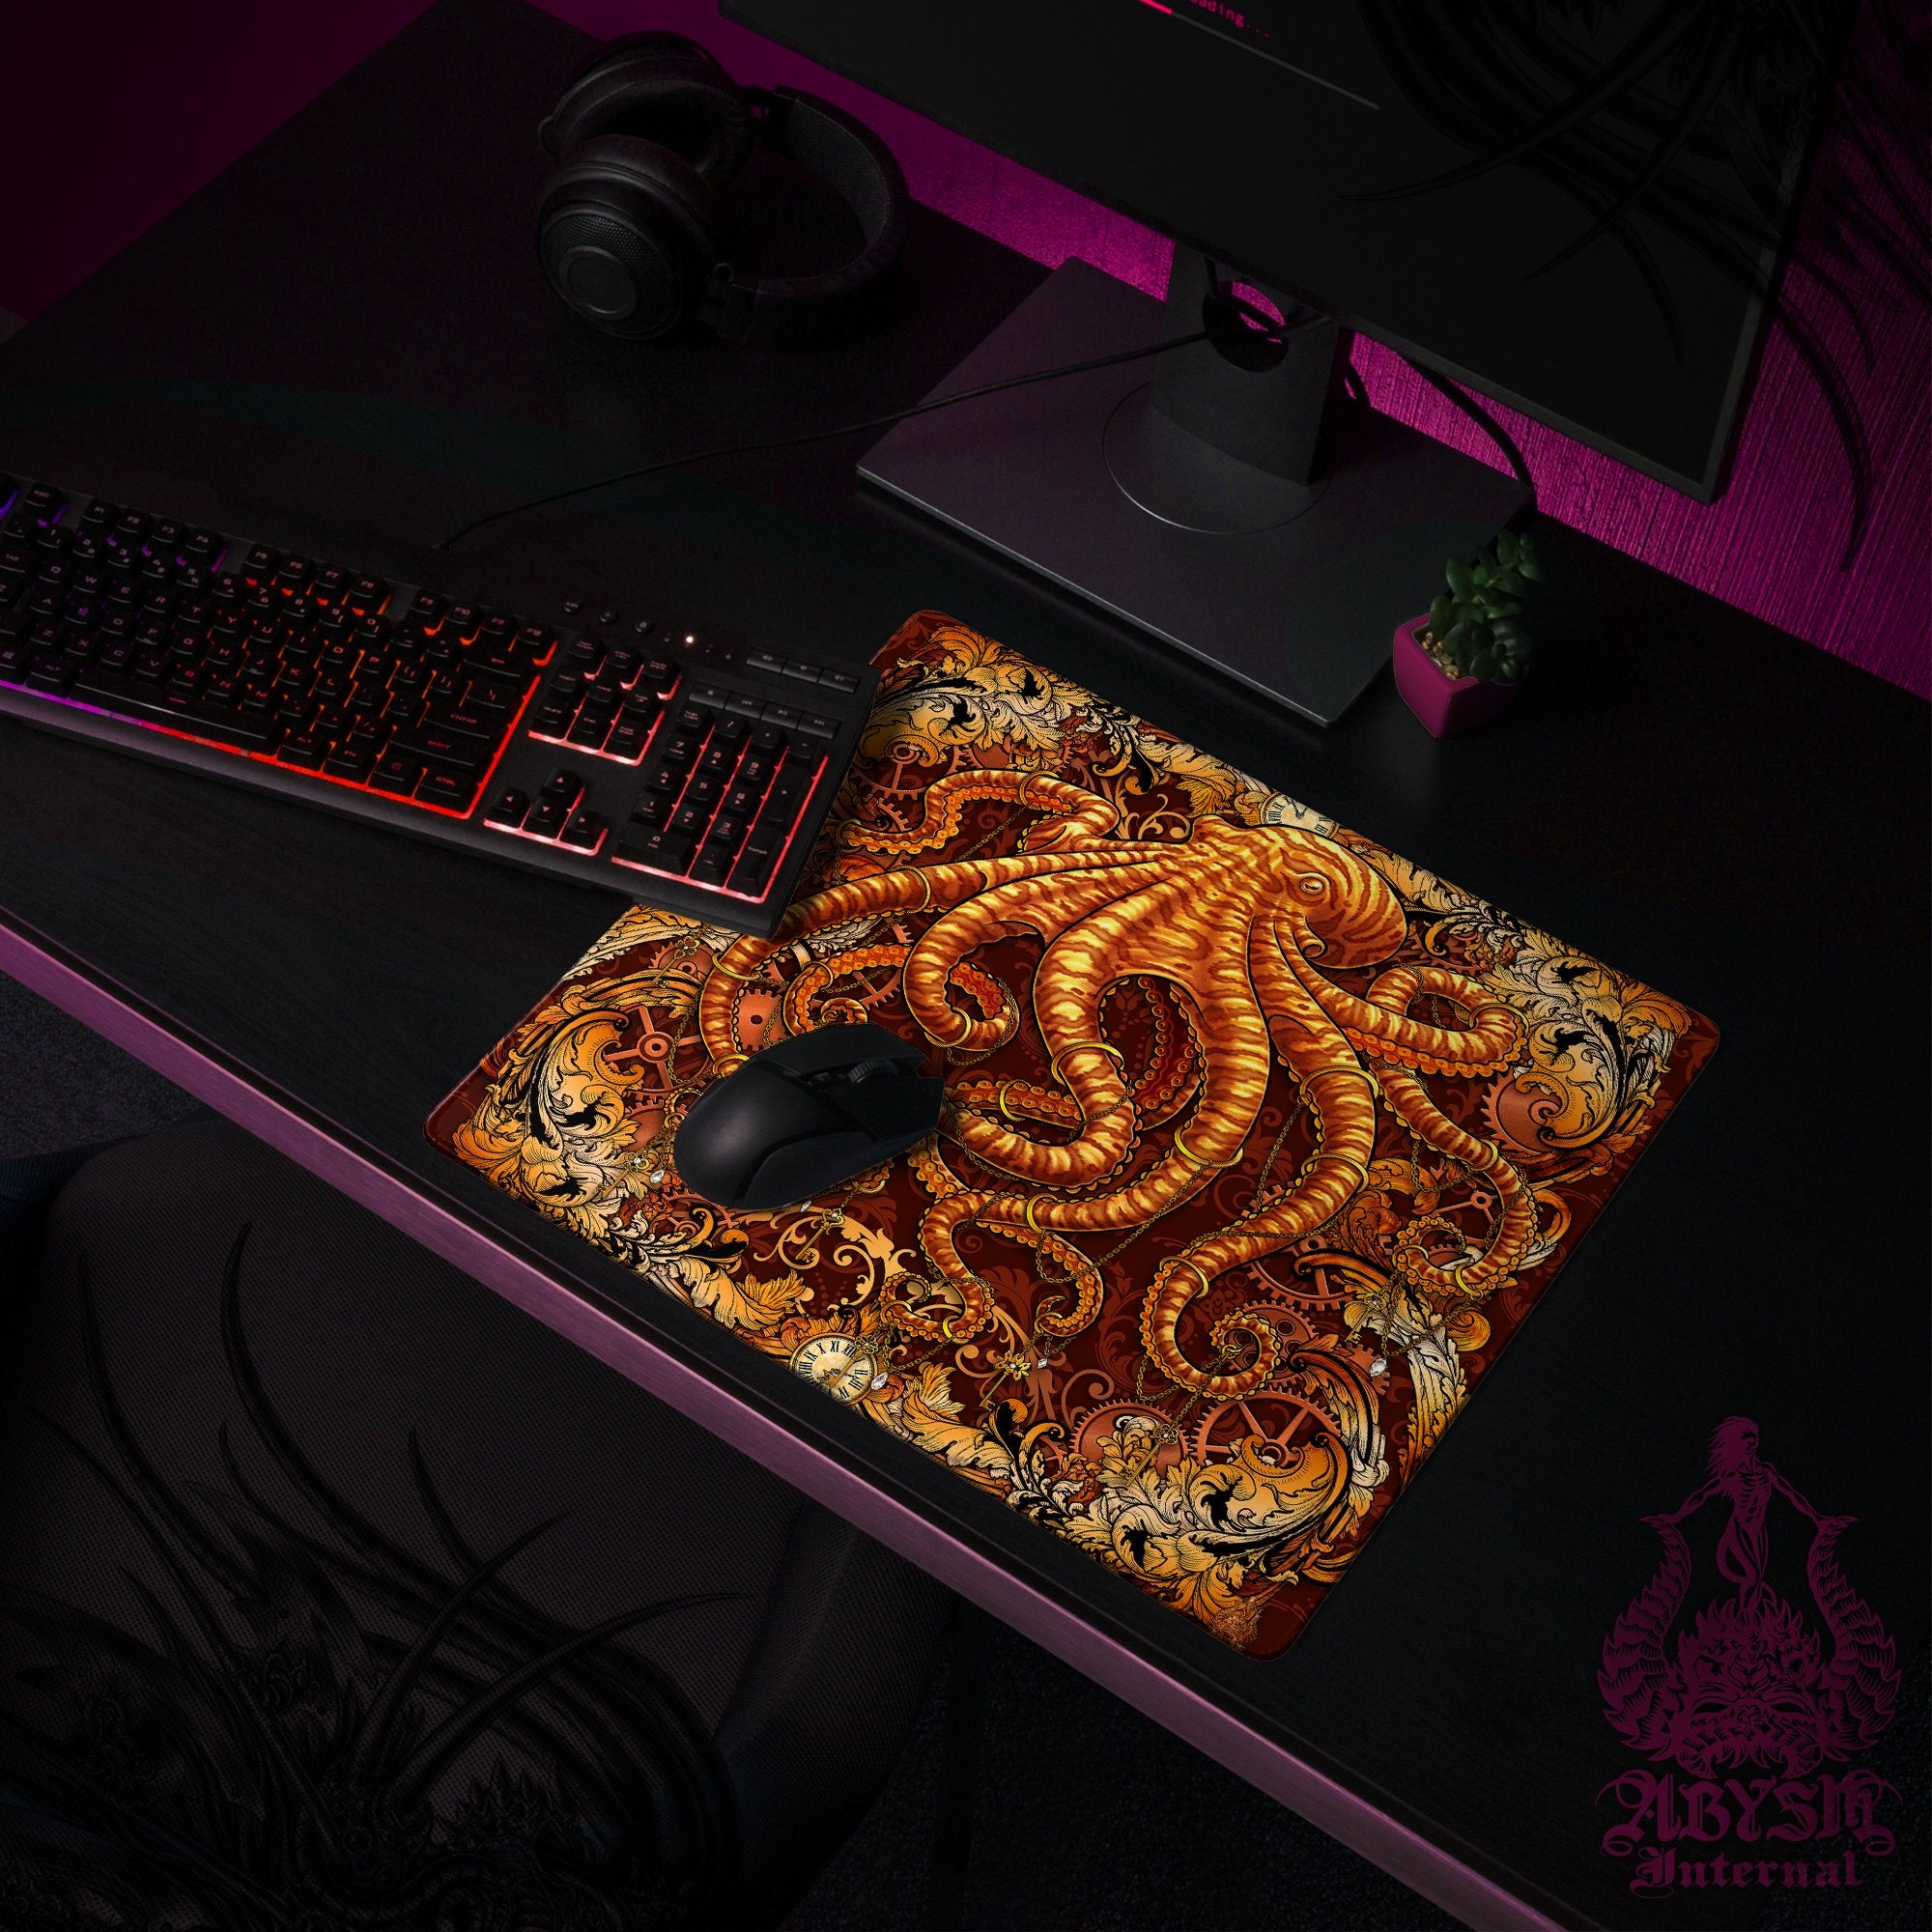 Octopus Gaming Desk Mat, Tentacles Mouse Pad, Steampunk Table Protector Cover, Gears Workpad, Fantasy Art Print - Abysm Internal